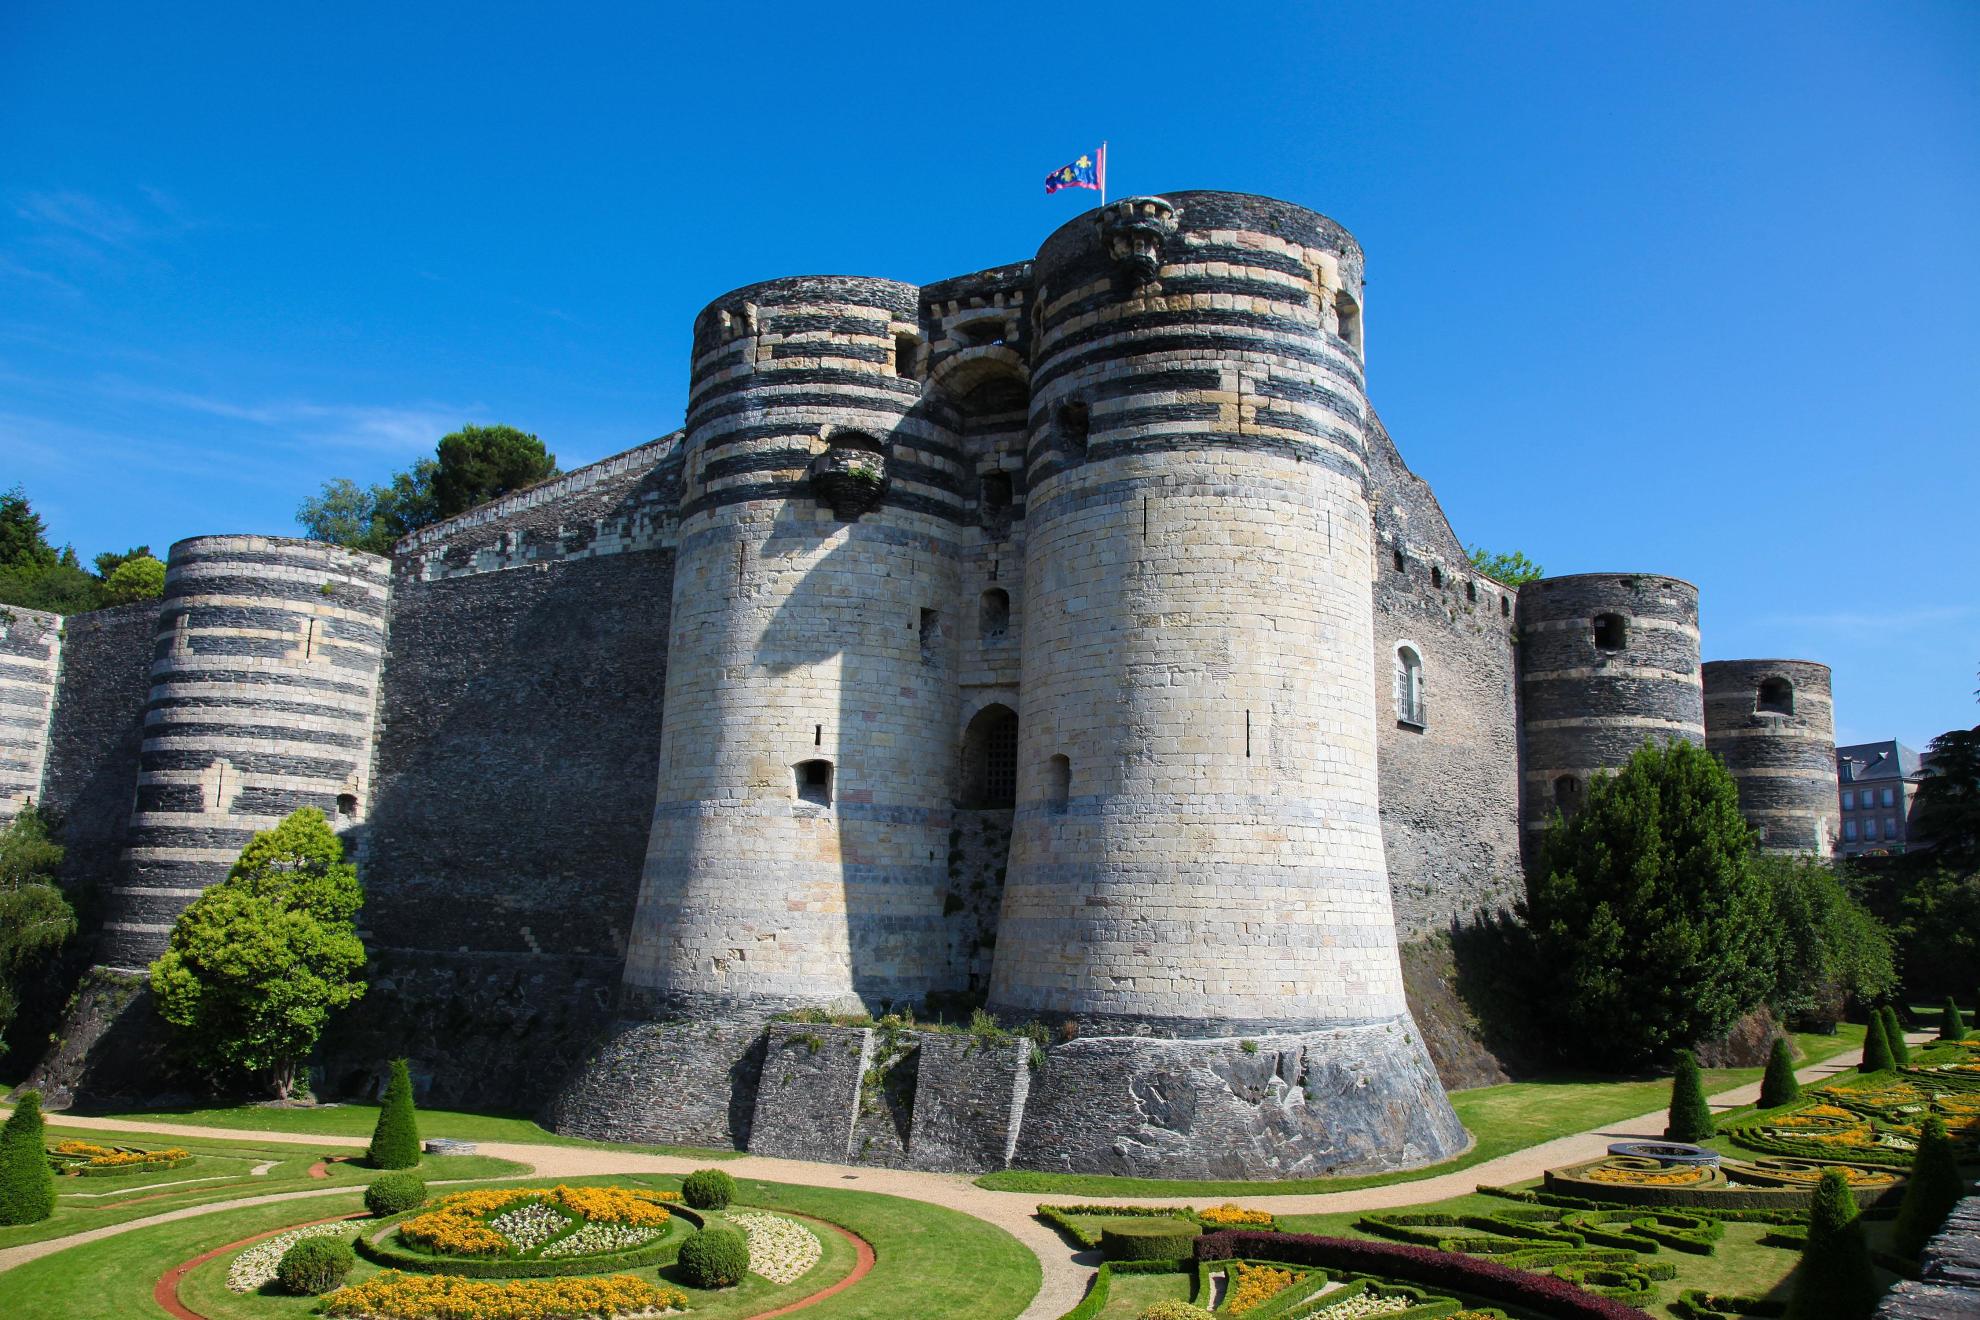 Chateau d'Angers © Shutterstock